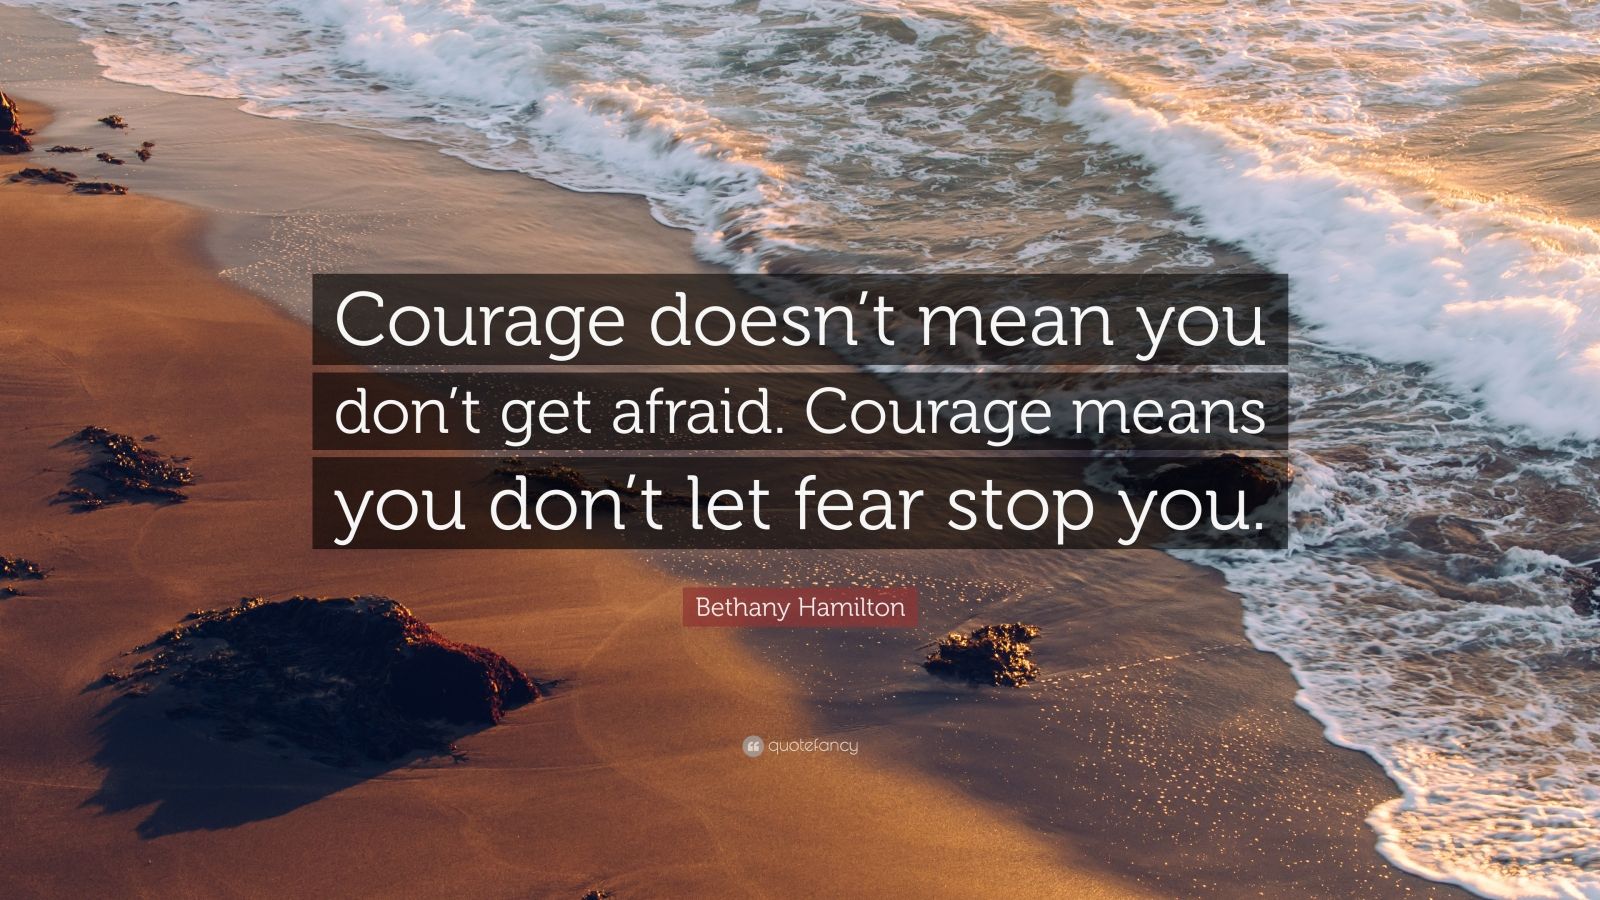 Bethany Hamilton Quote: “Courage doesn’t mean you don’t get afraid ...